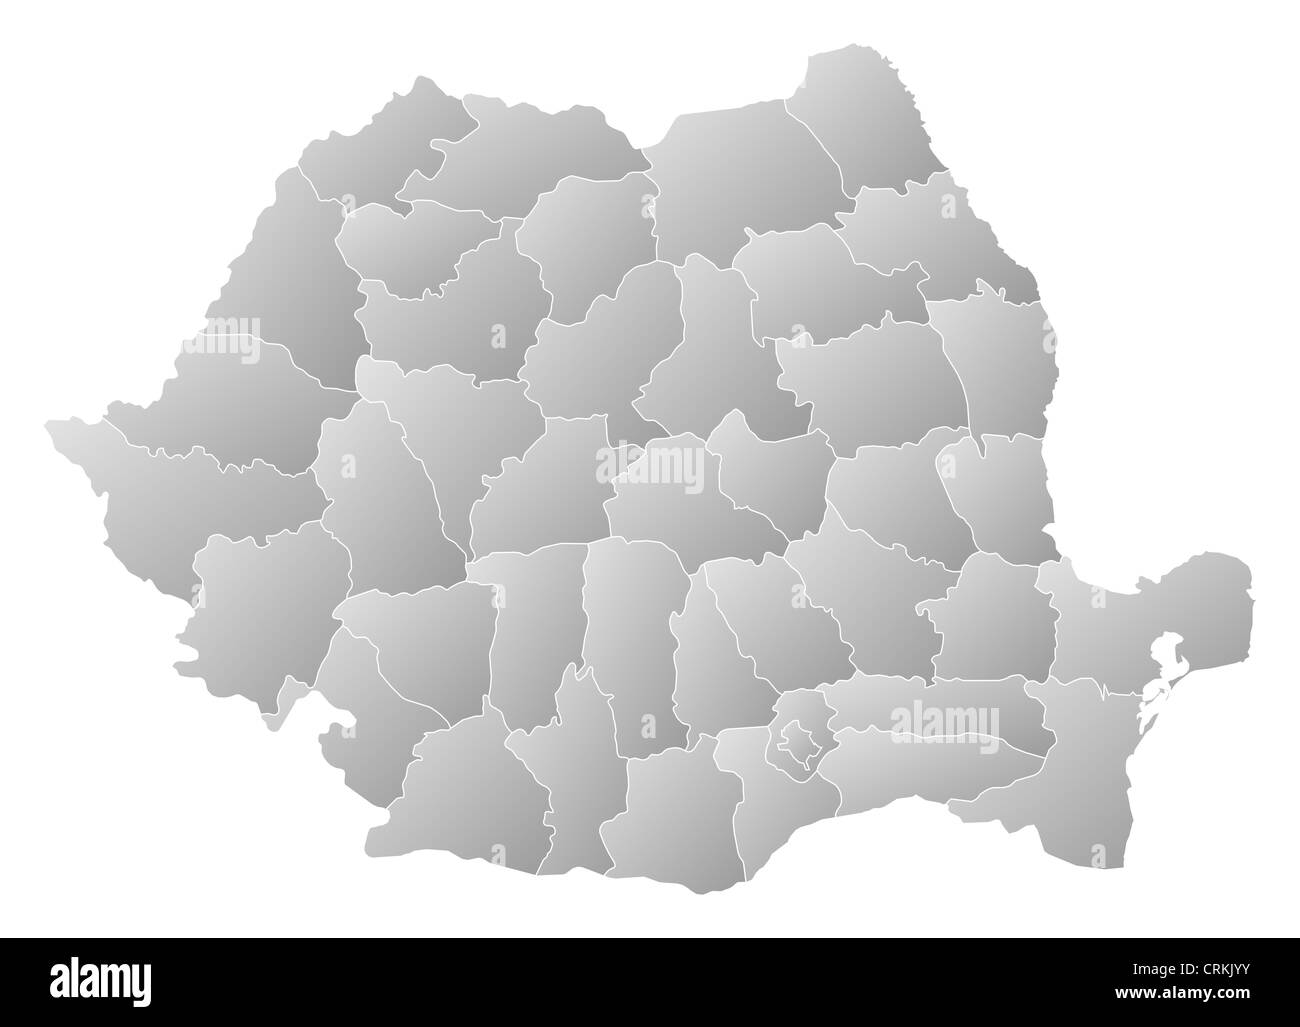 Political map of Romania with the several counties. Stock Photo